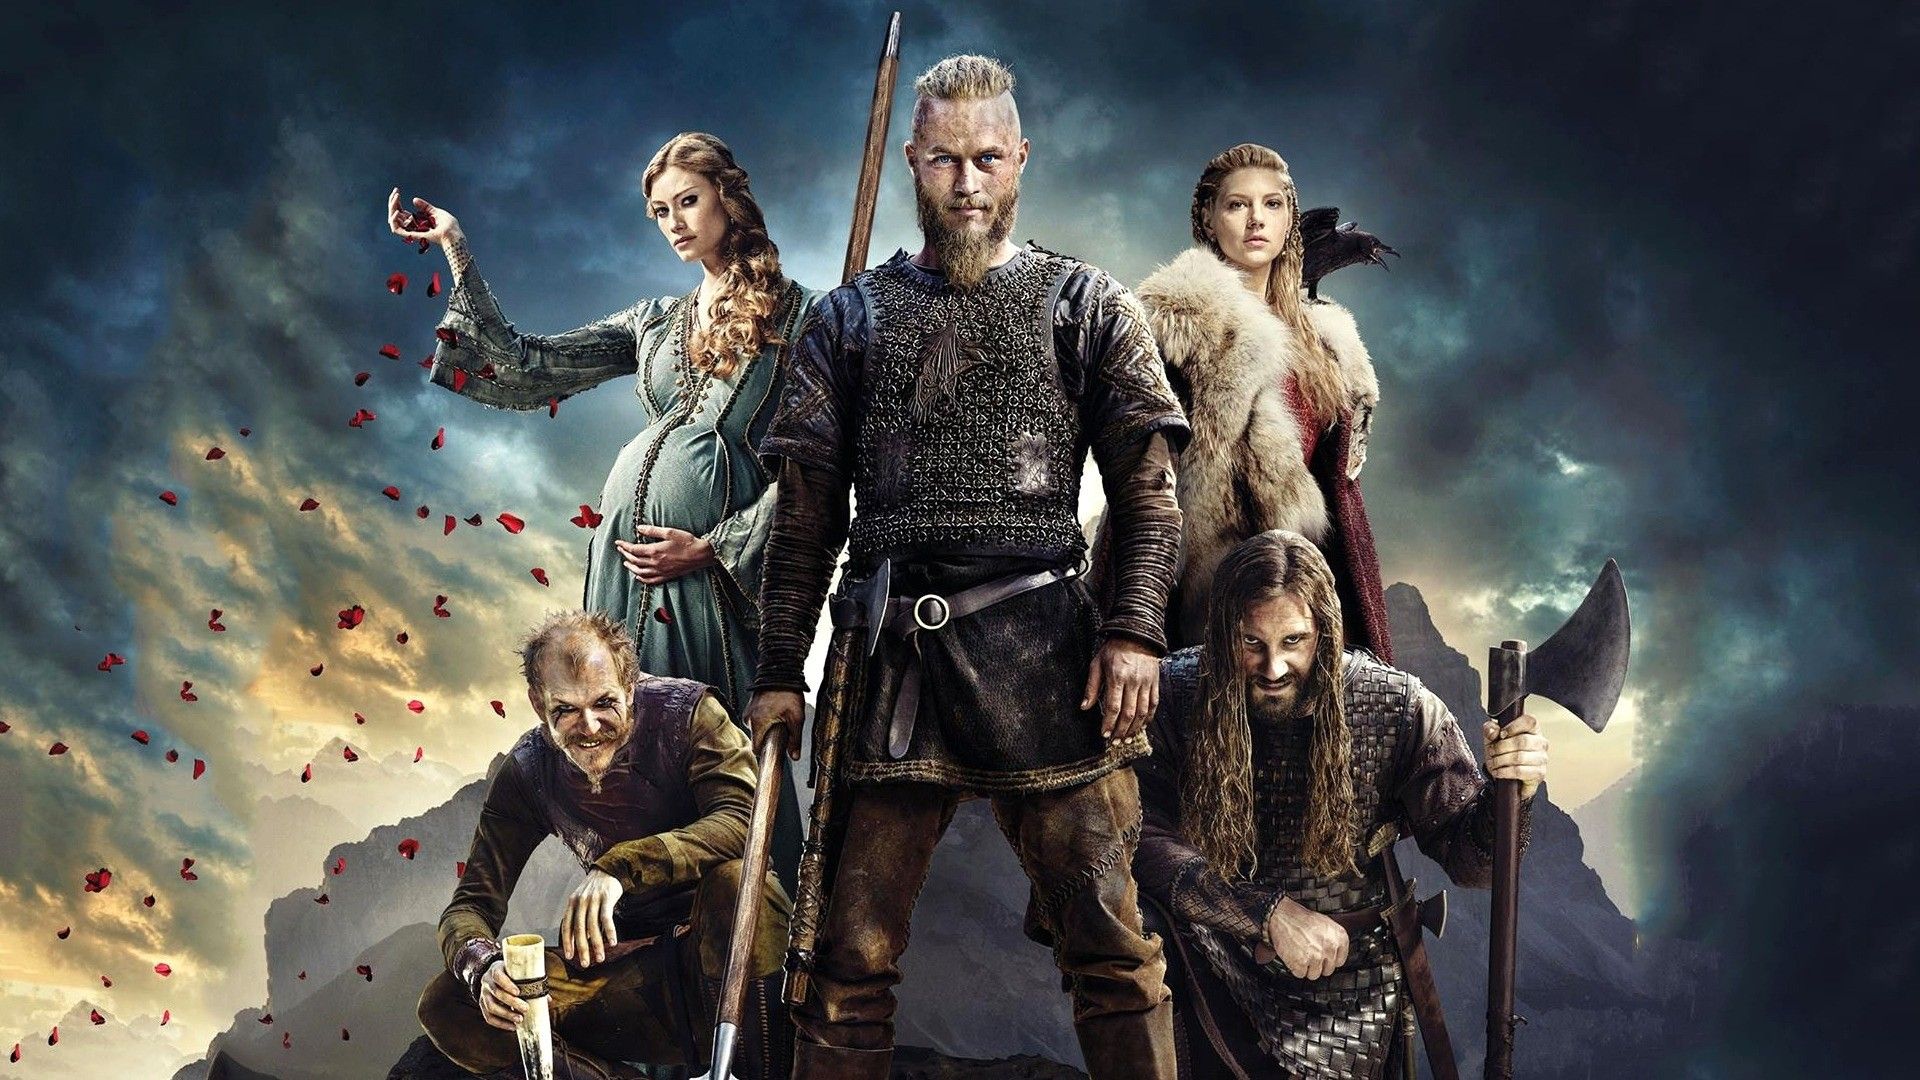 Read the saga of the real Viking king Ragnar Lothbrok as you watch the hit tv show Vikings on the History Channel